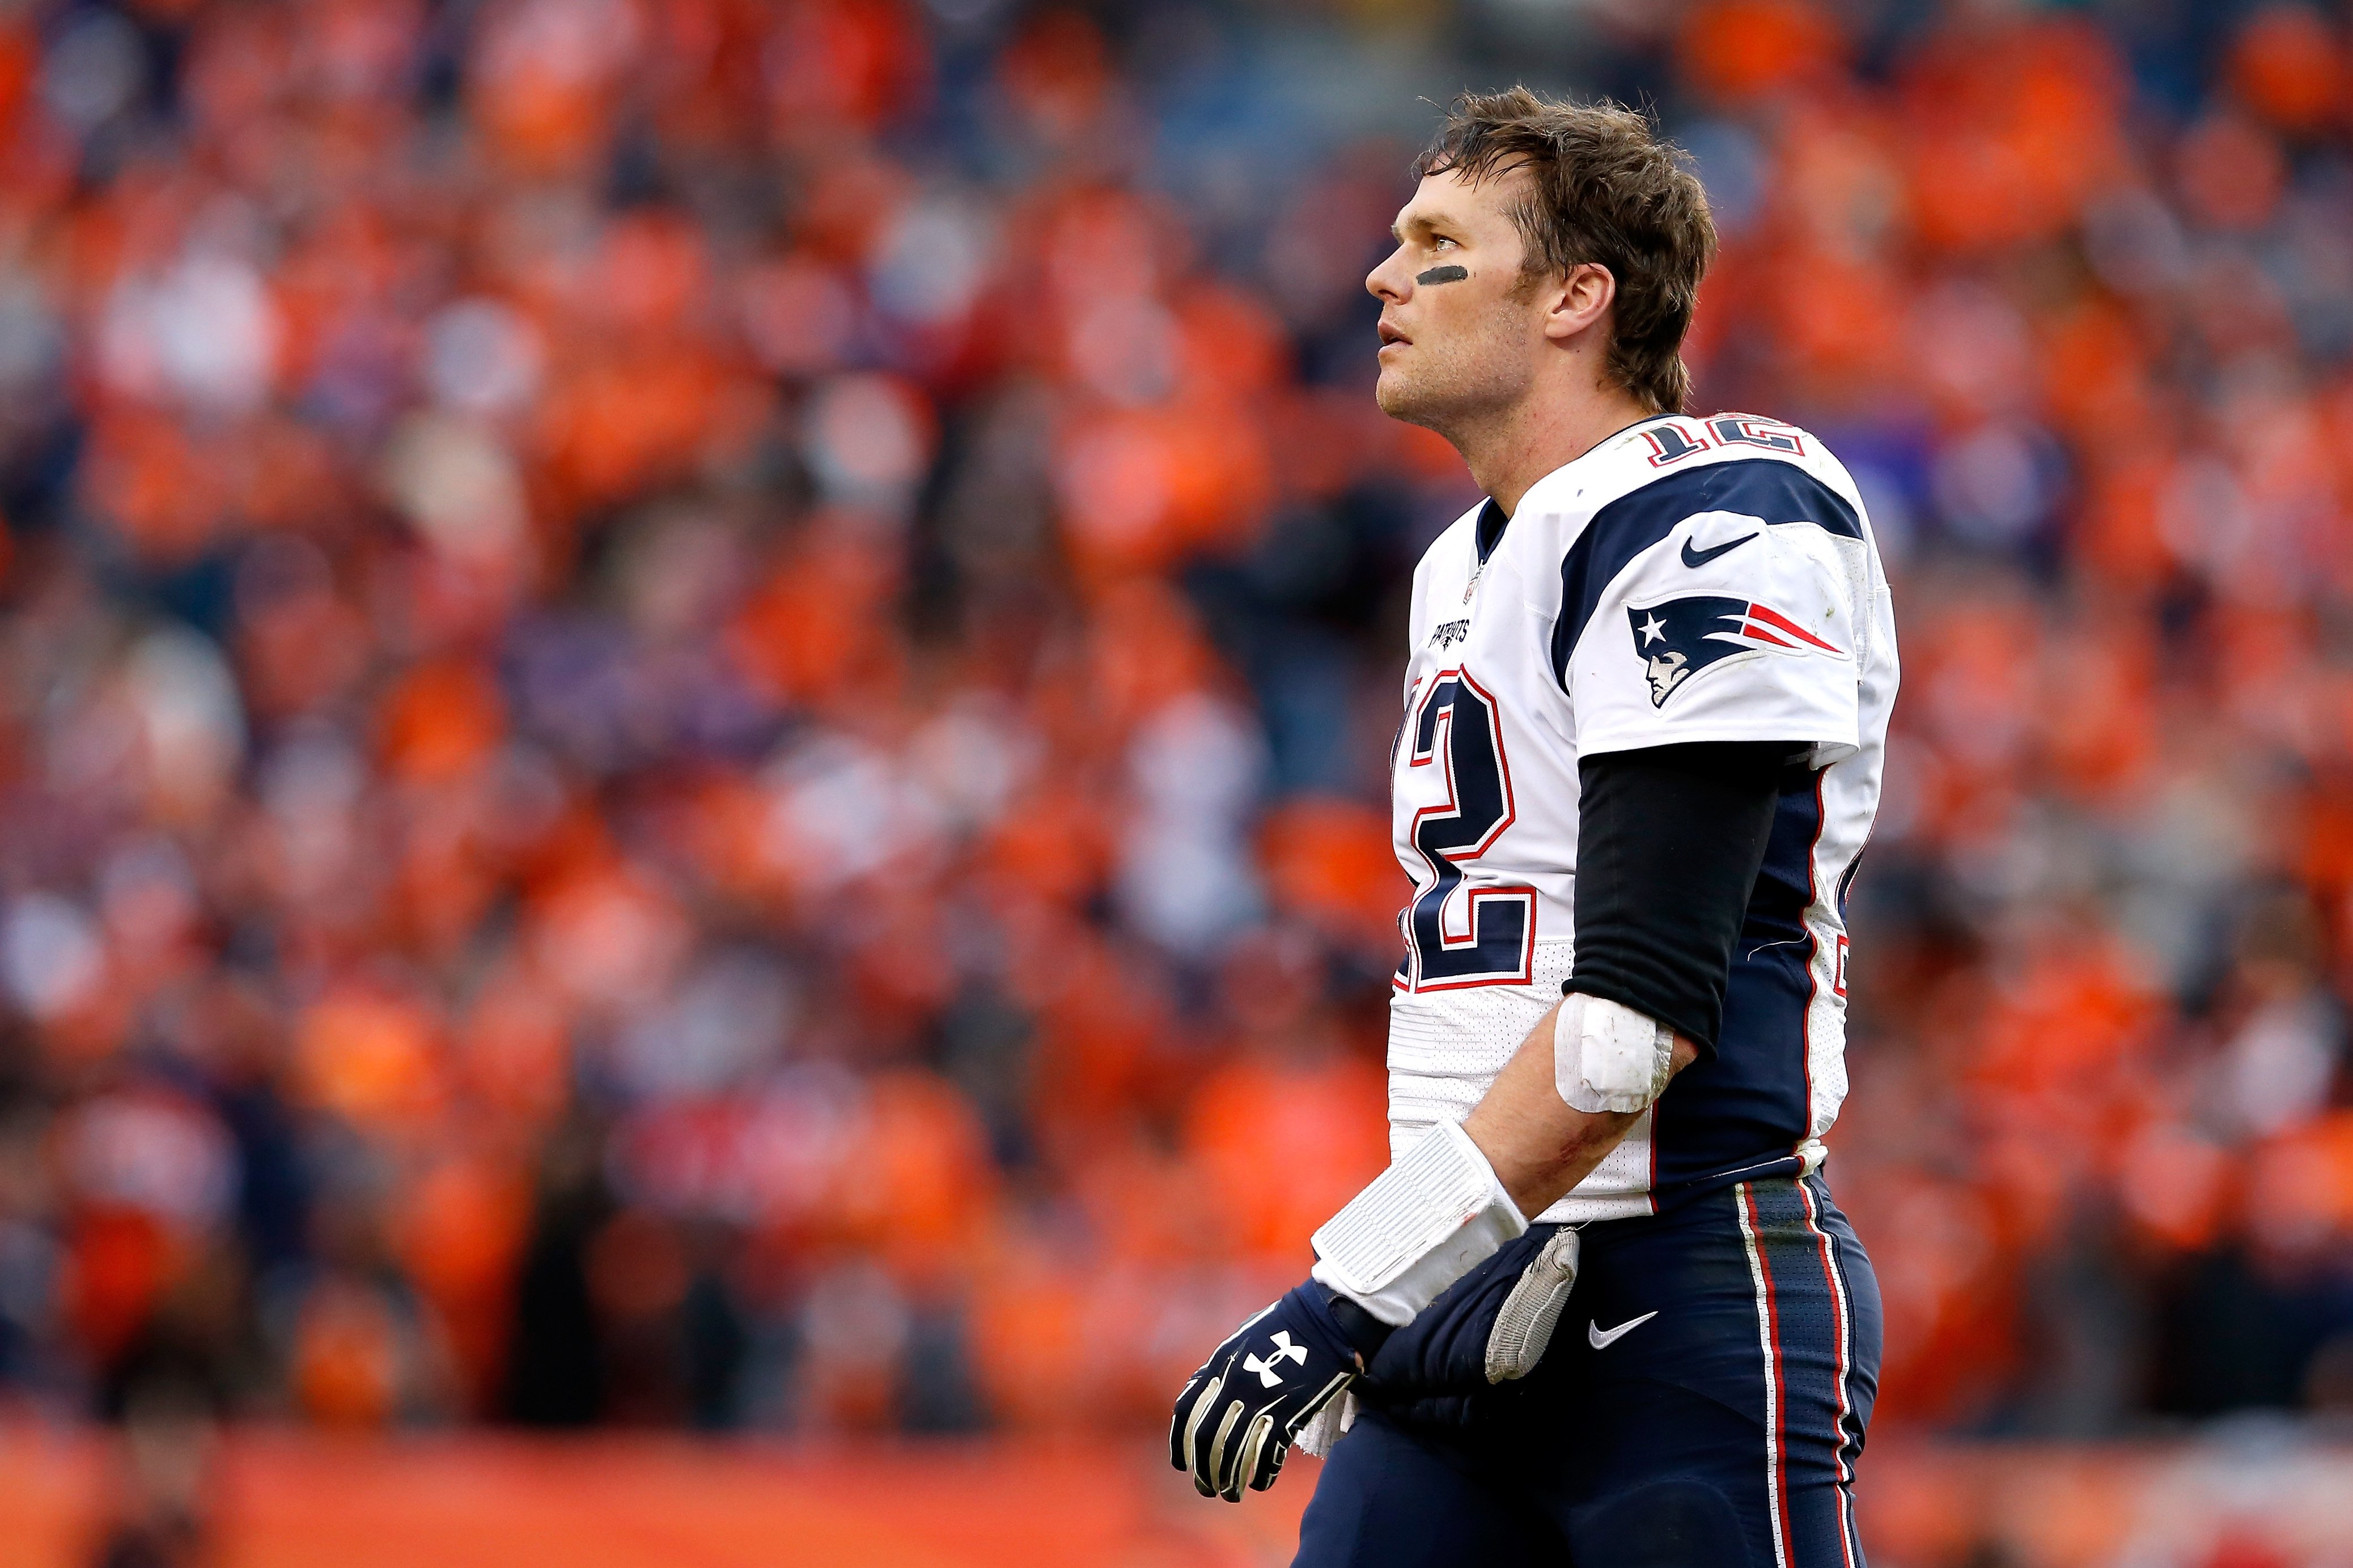 Tom Brady #12 of the New England Patriots walks off the field in the fourth quarter against the Denver Broncos in the AFC Championship game at Sports Authority Field at Mile High in Denver on Jan. 24, 2016. (Christian Petersen—Getty Images)